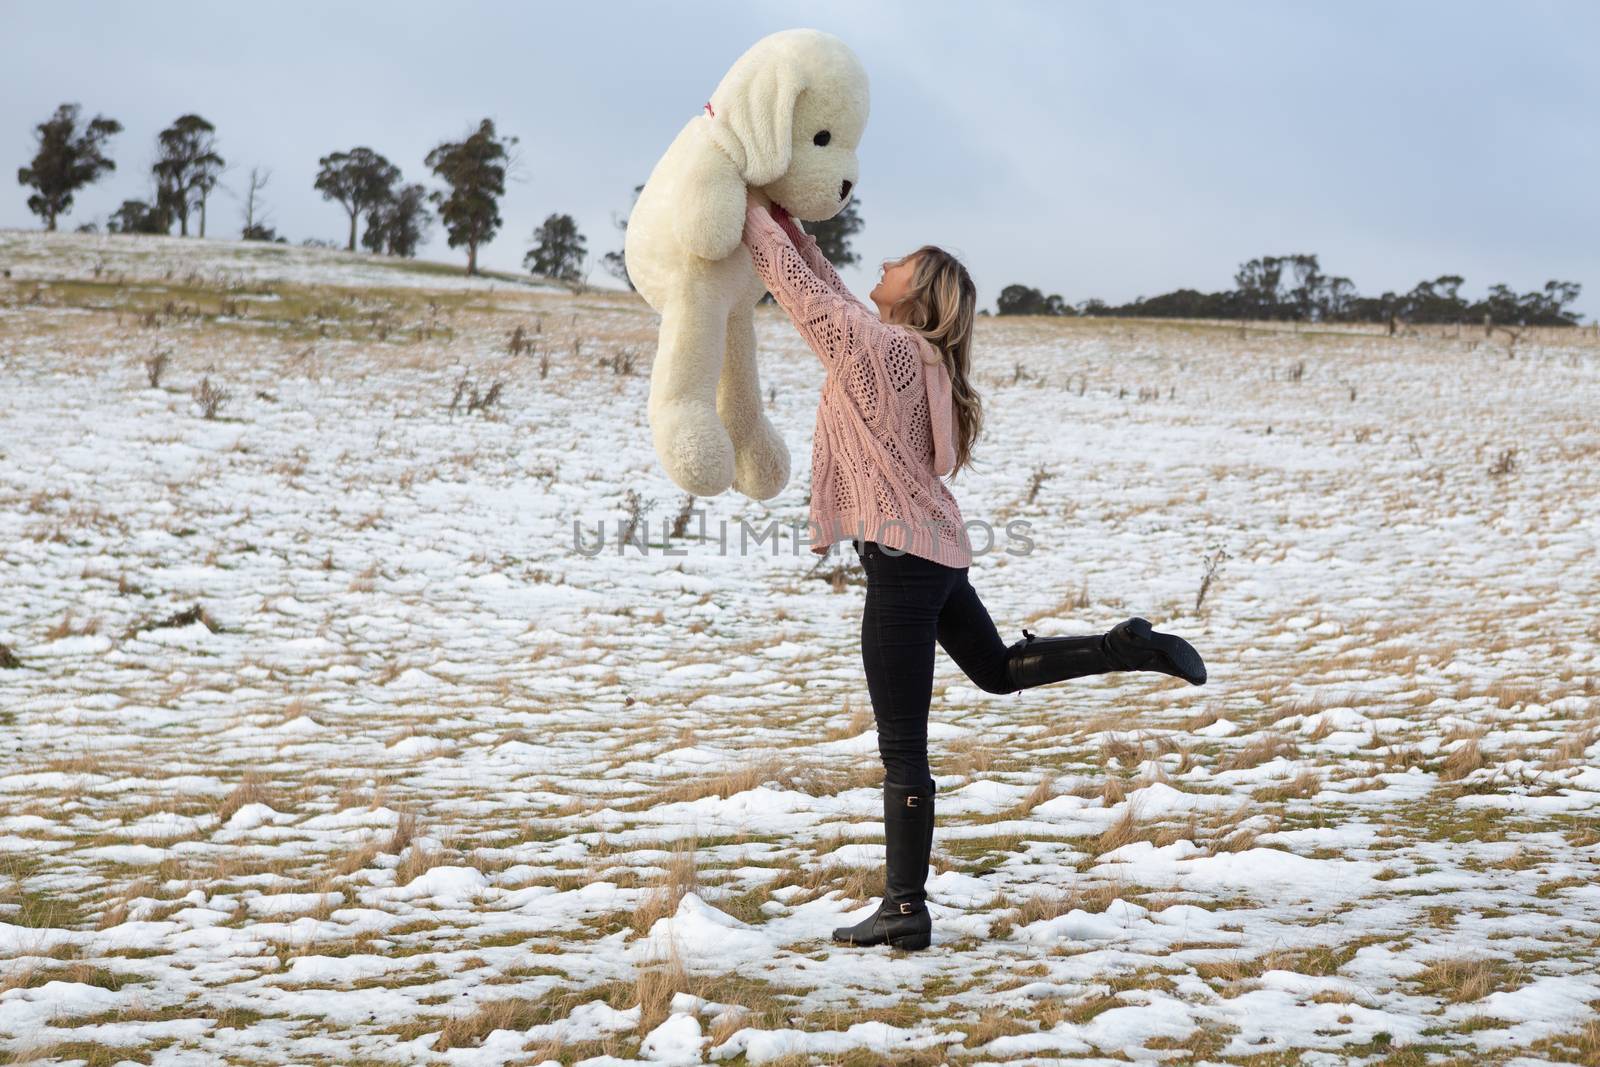 Woman frolicking in the snow with teddy bear by lovleah